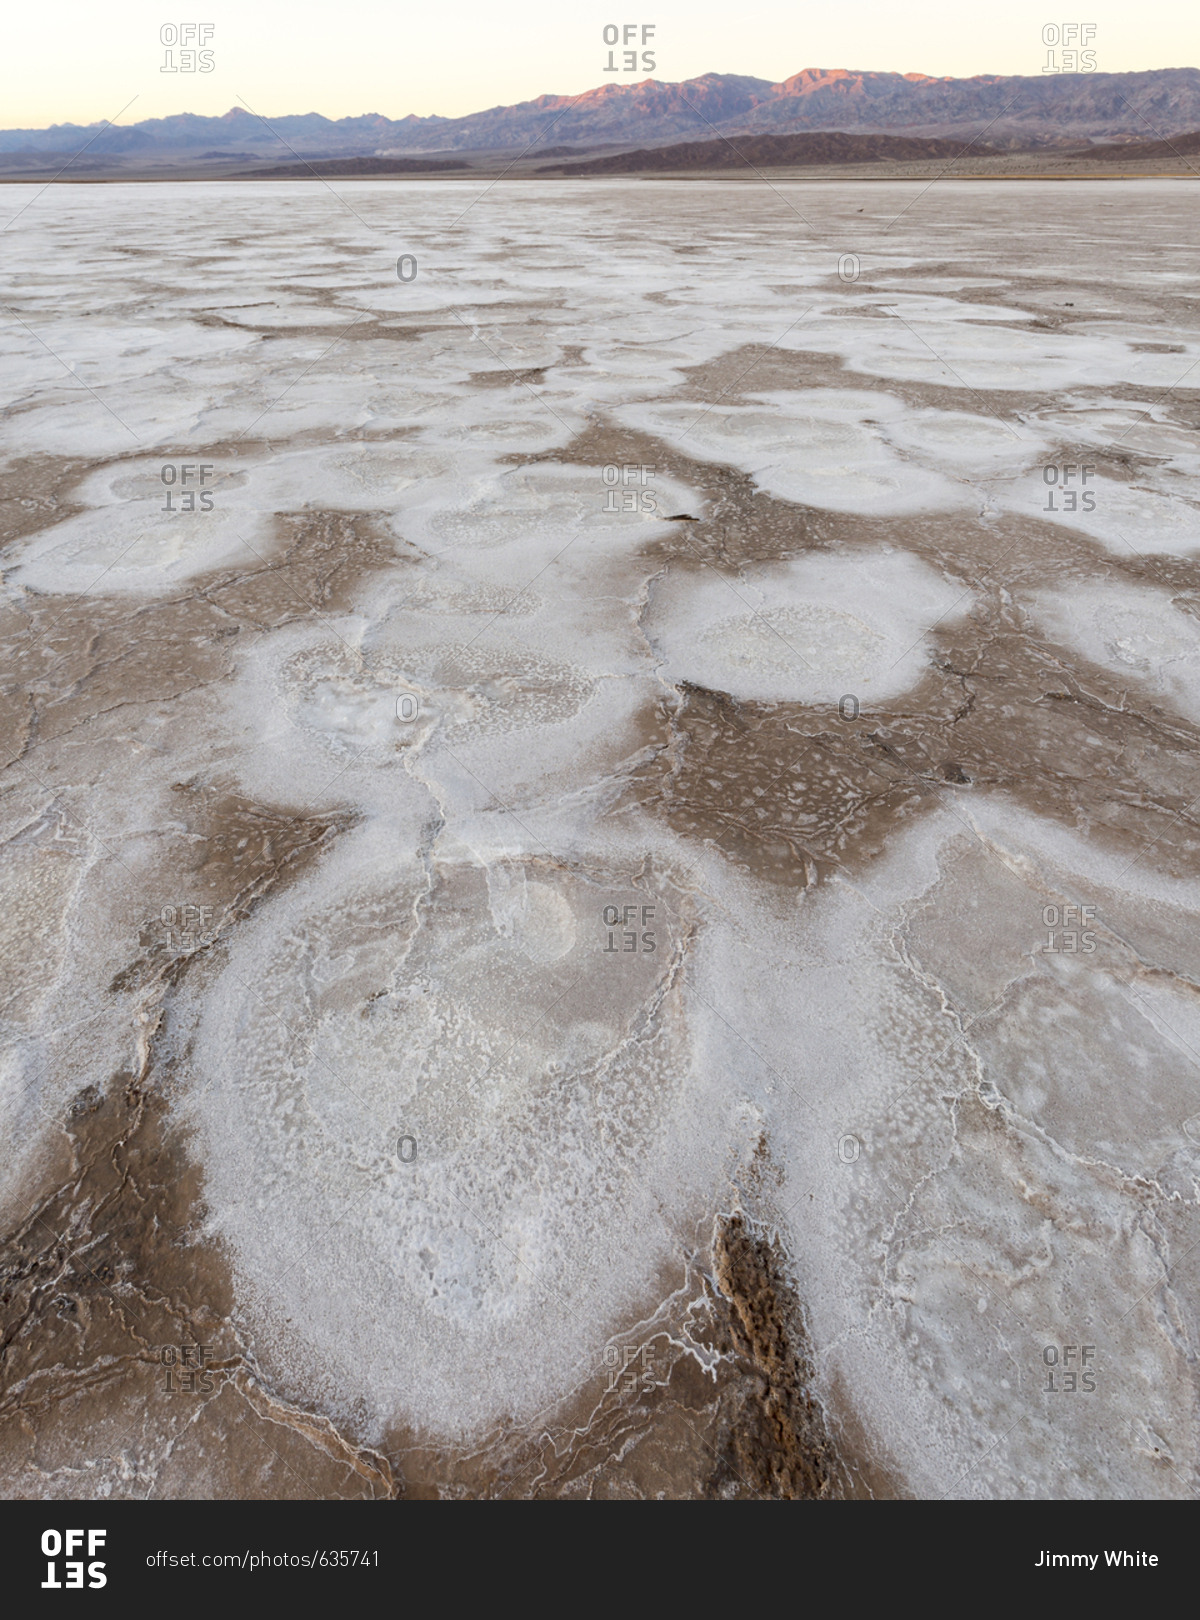 Evaporated salt formations in Death Valley National Park, California